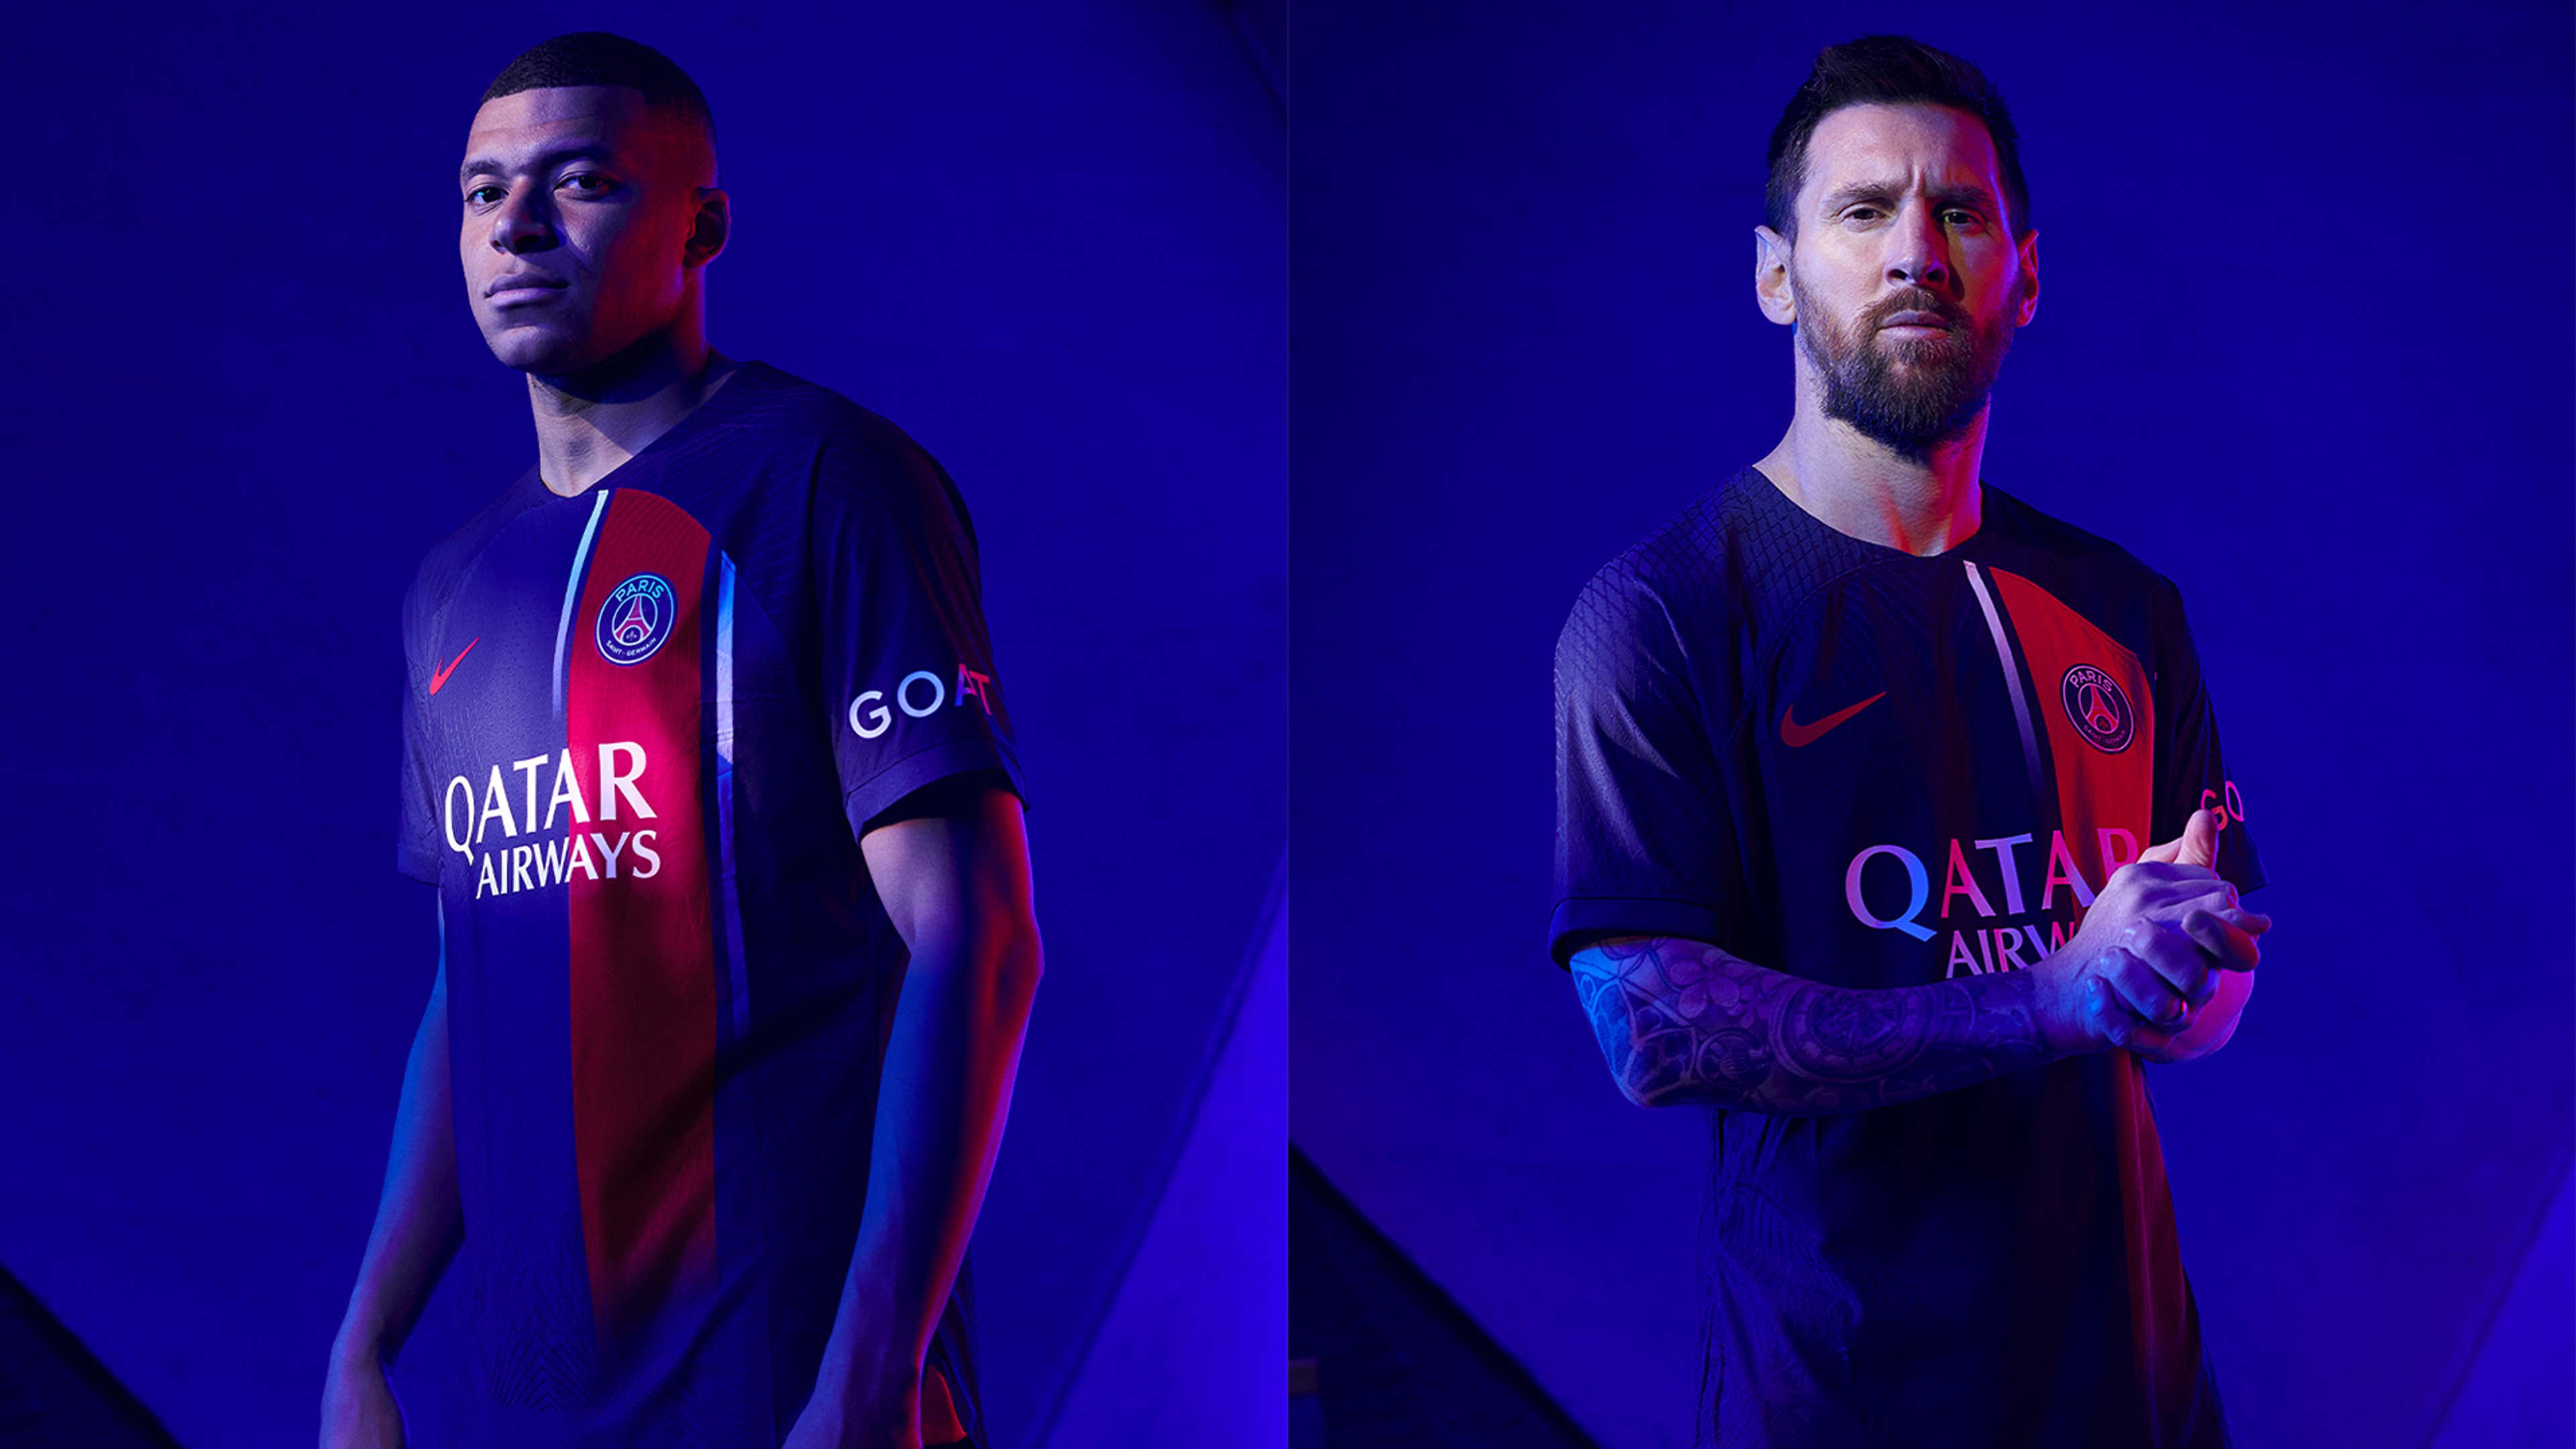 PSG 2023-24 home kit - Mbappe and Messi